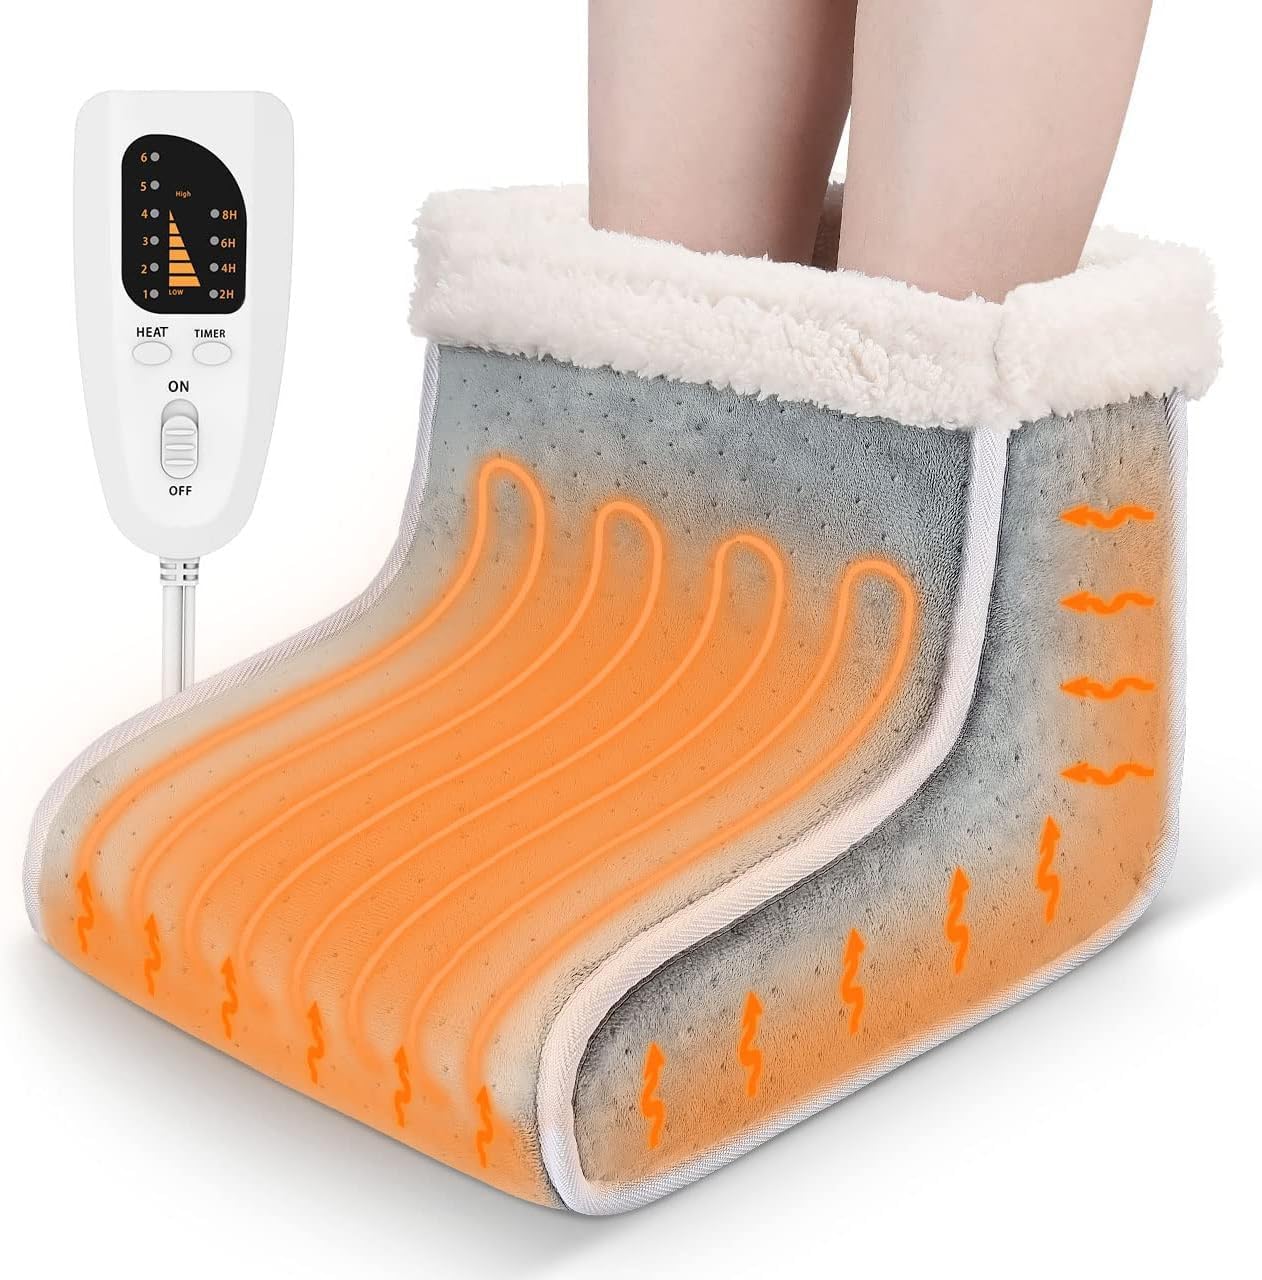 Electric Foot Warmer, Rapid Heating Pad for Feet, Soft Heated Slippers Women Men, 6-Level Heating Feet Warmers Washable, Heated Foot Warmer for Bed/Christmas/Home/Office, Safety, Detachable